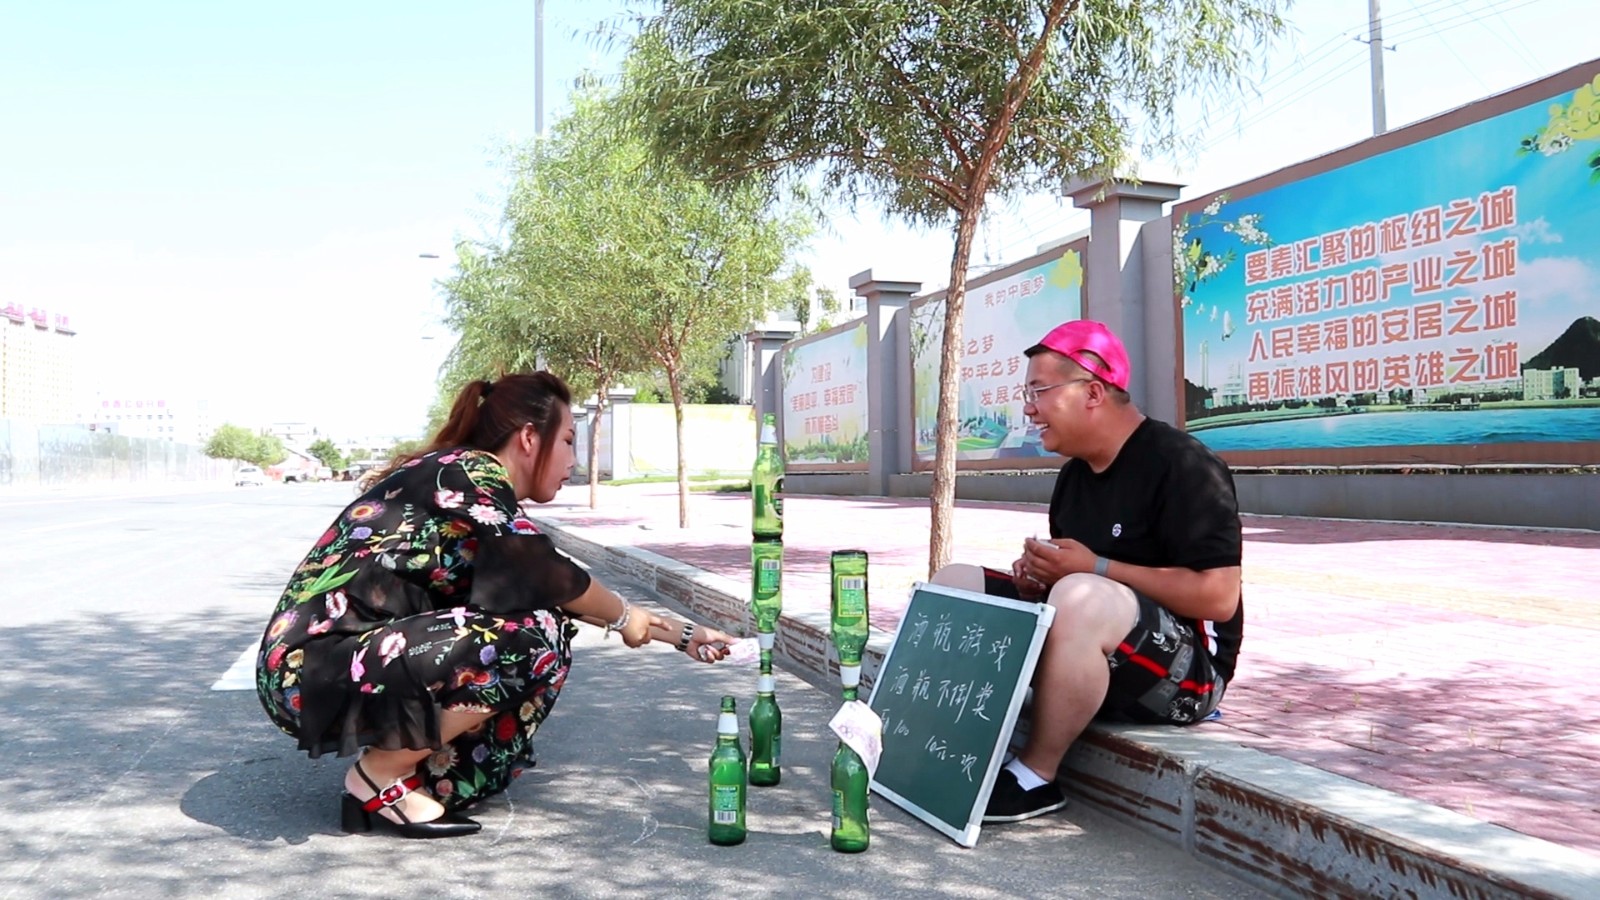 New street scam, bottle not poured 100 yuan, did not want to meet a master, the end is too funny